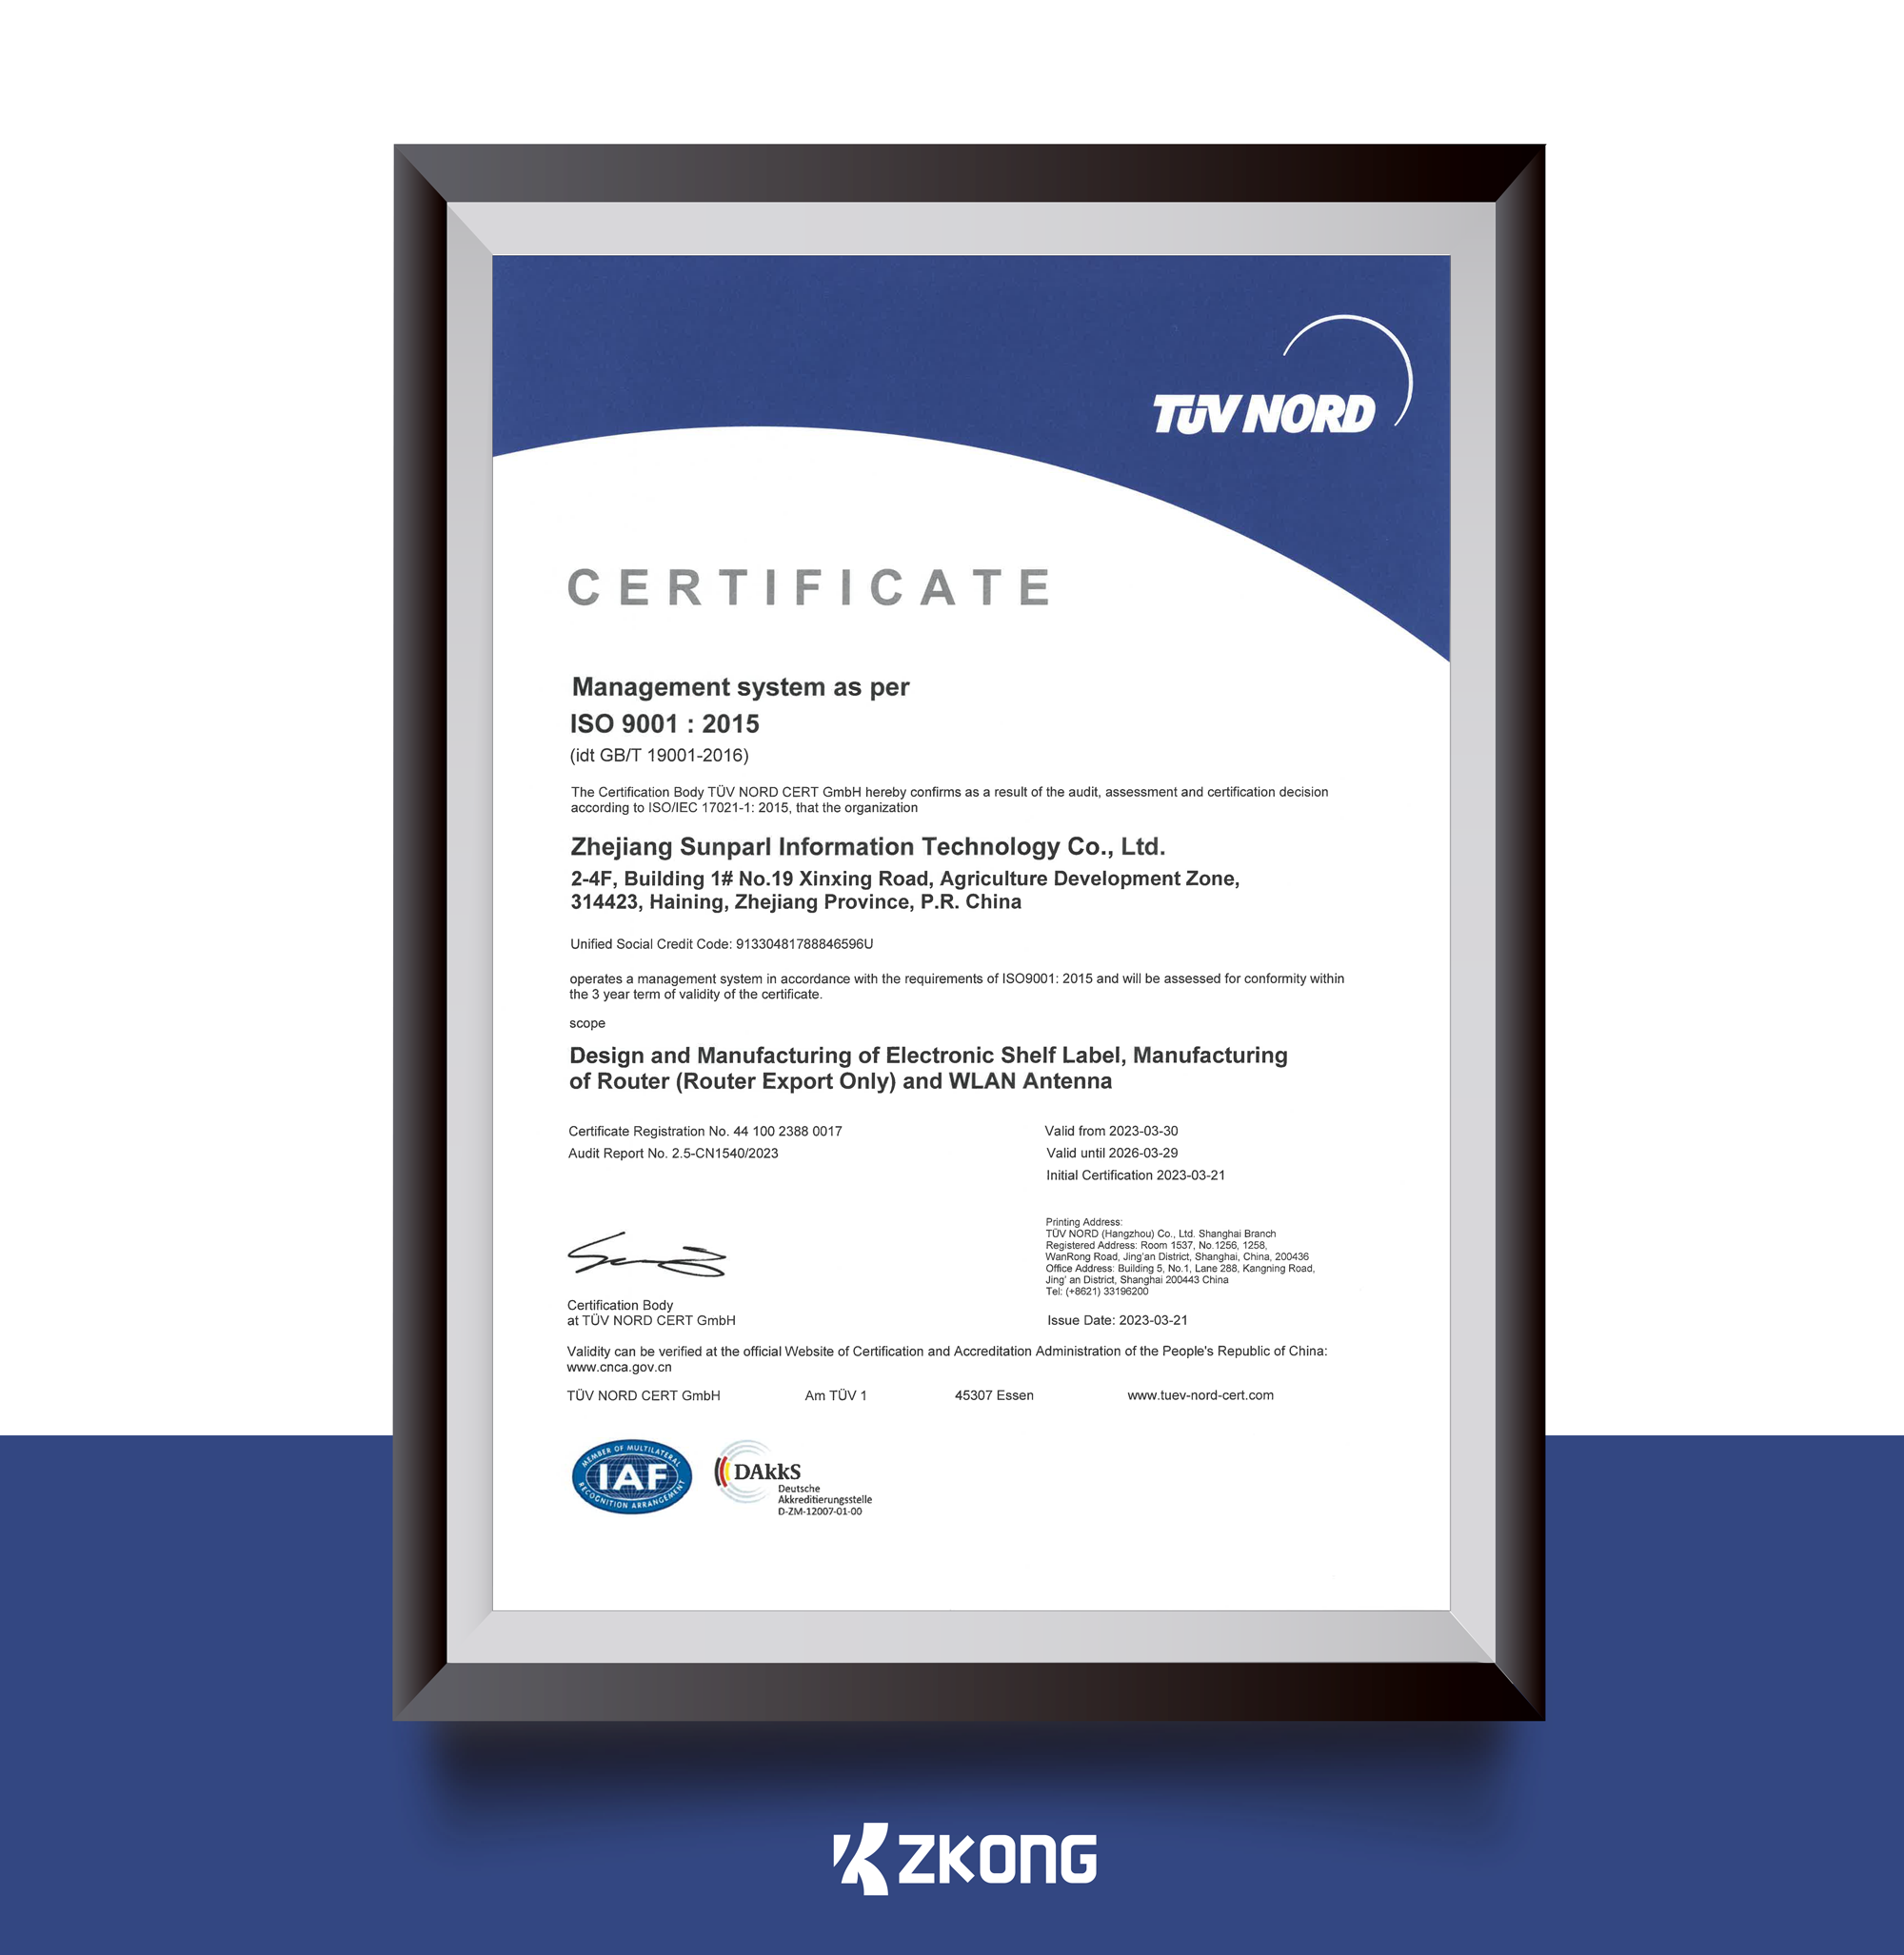 Zkong’s Parent Company Sunparl Attains ISO 9001:2015 Certification